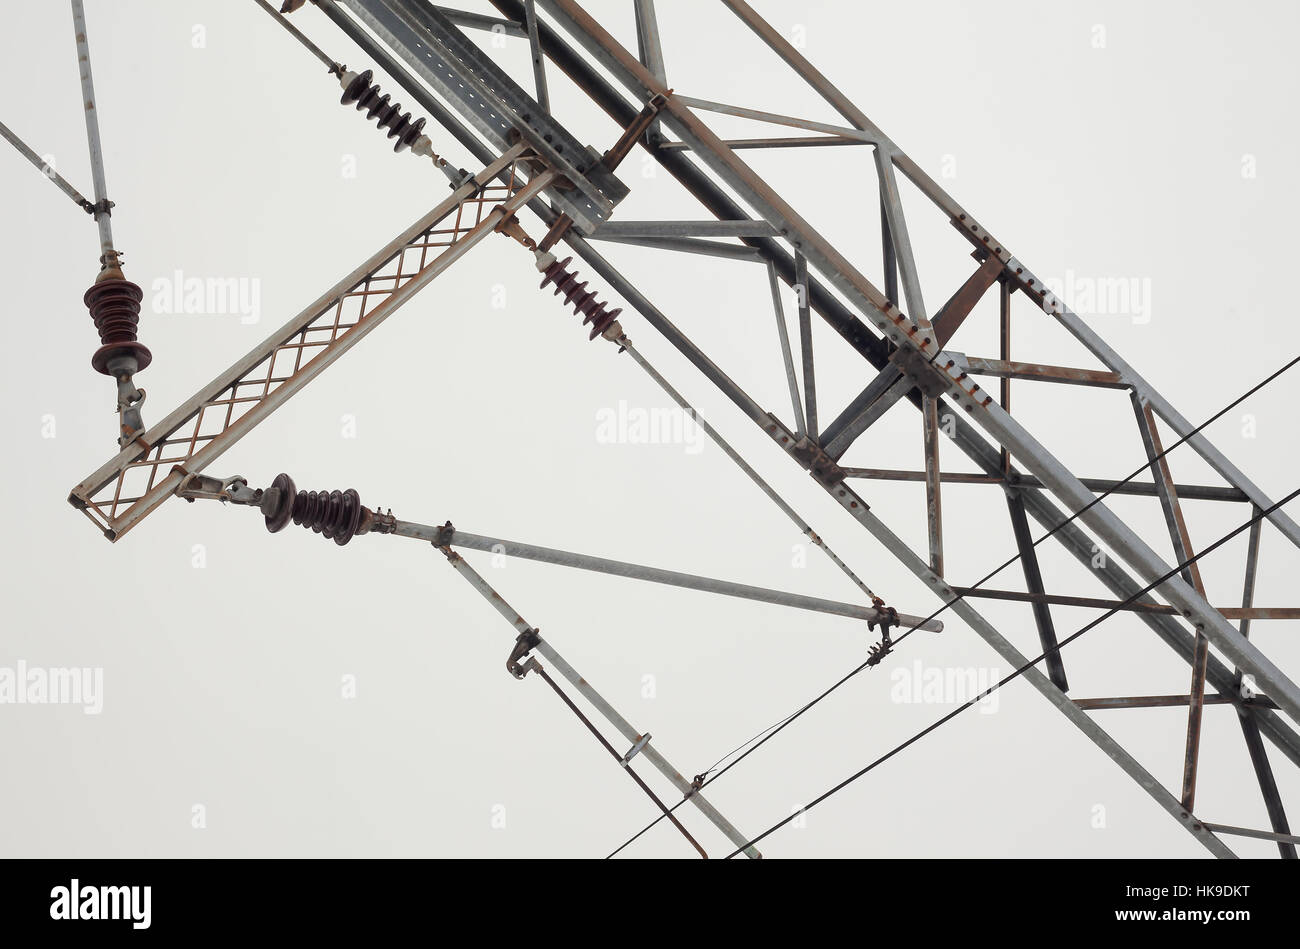 Abstract composition of railway electric wires. Stock Photo